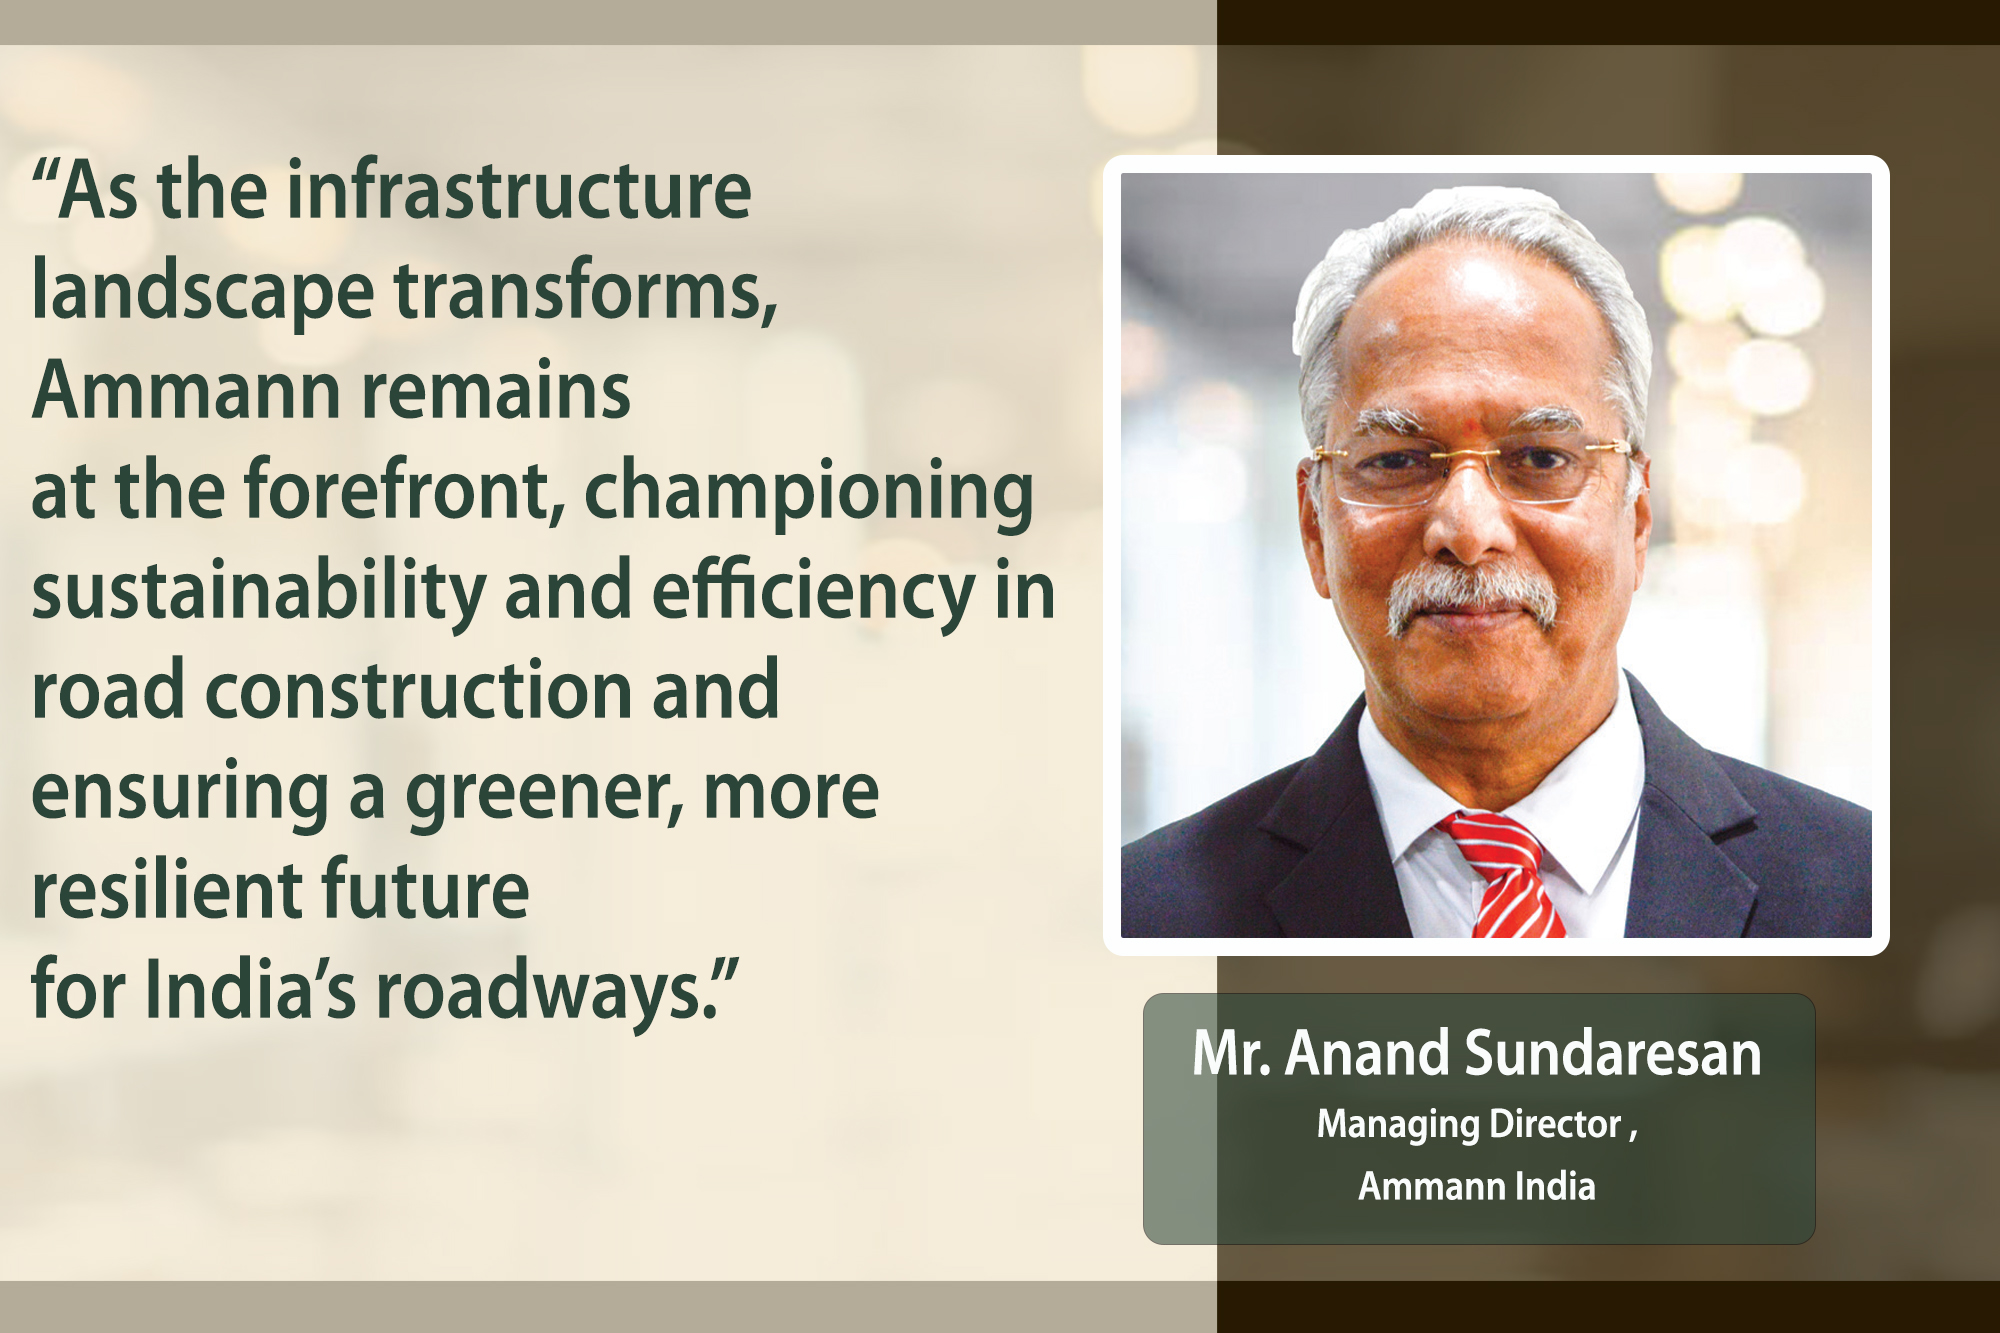 Ammann’s cutting-edge solutions pave the way for green infrastructure in India